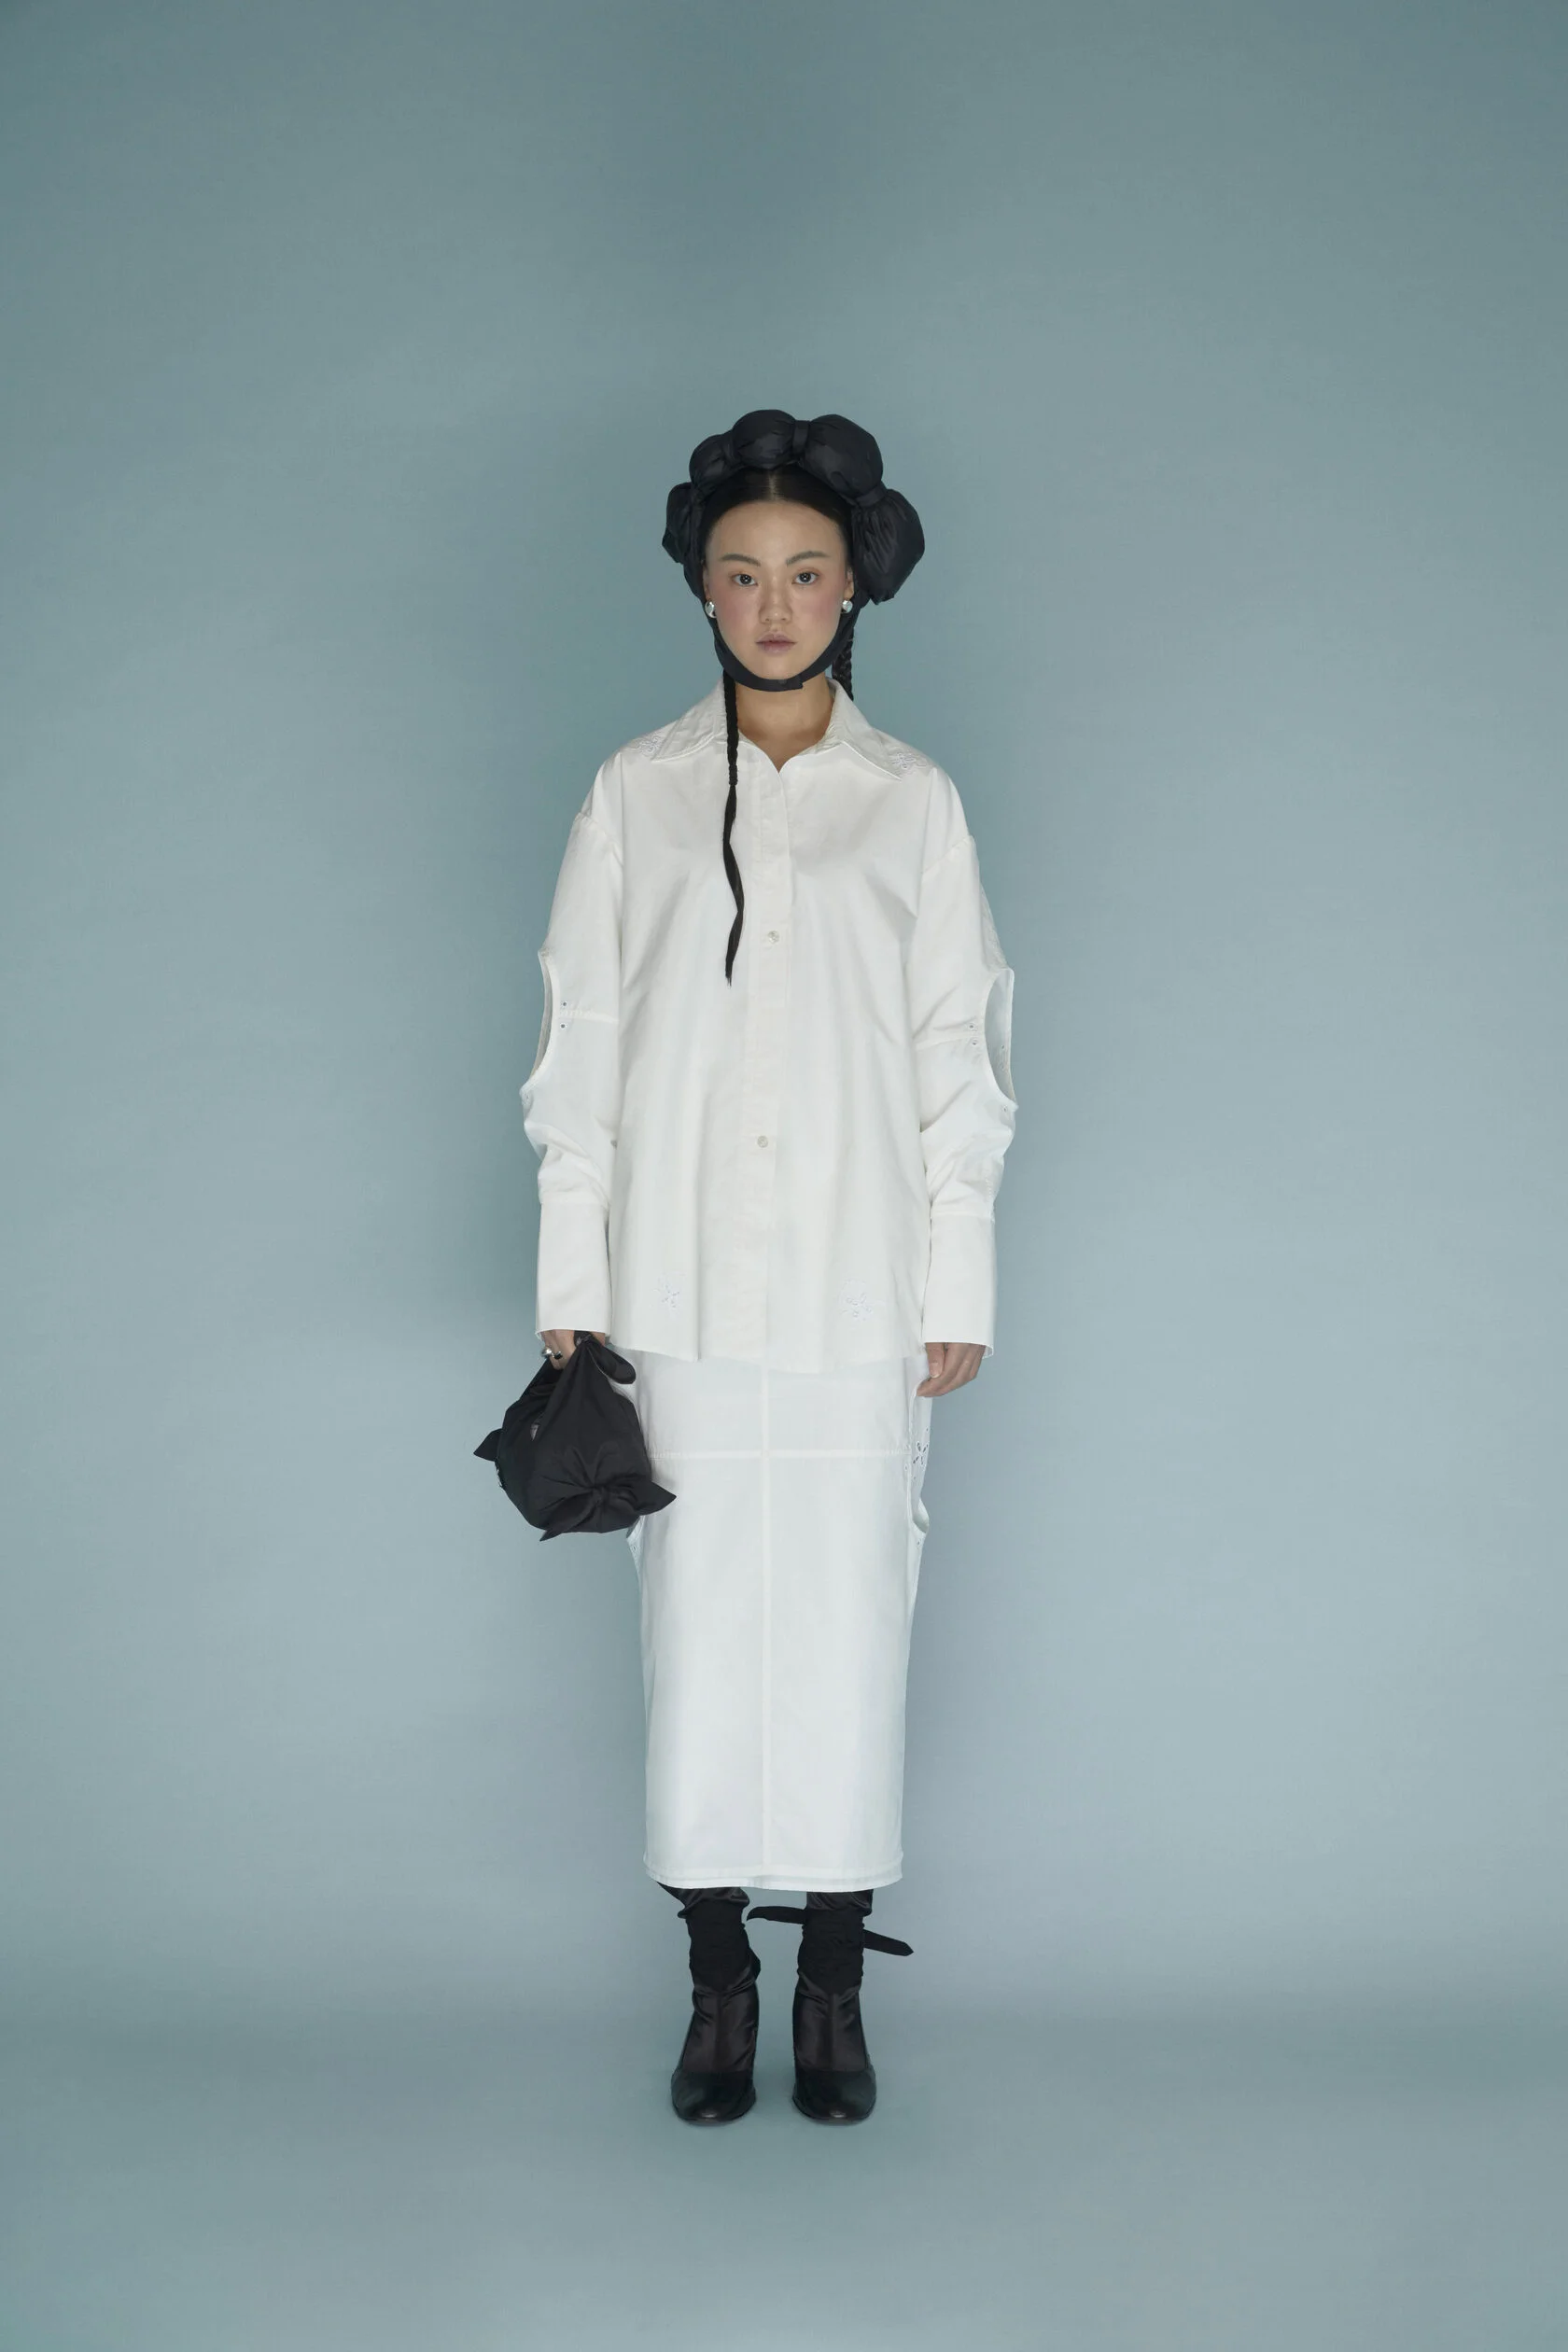 Invite An Entirely New Aesthetic Into Your Wardrobe With These Looks From J.Kim